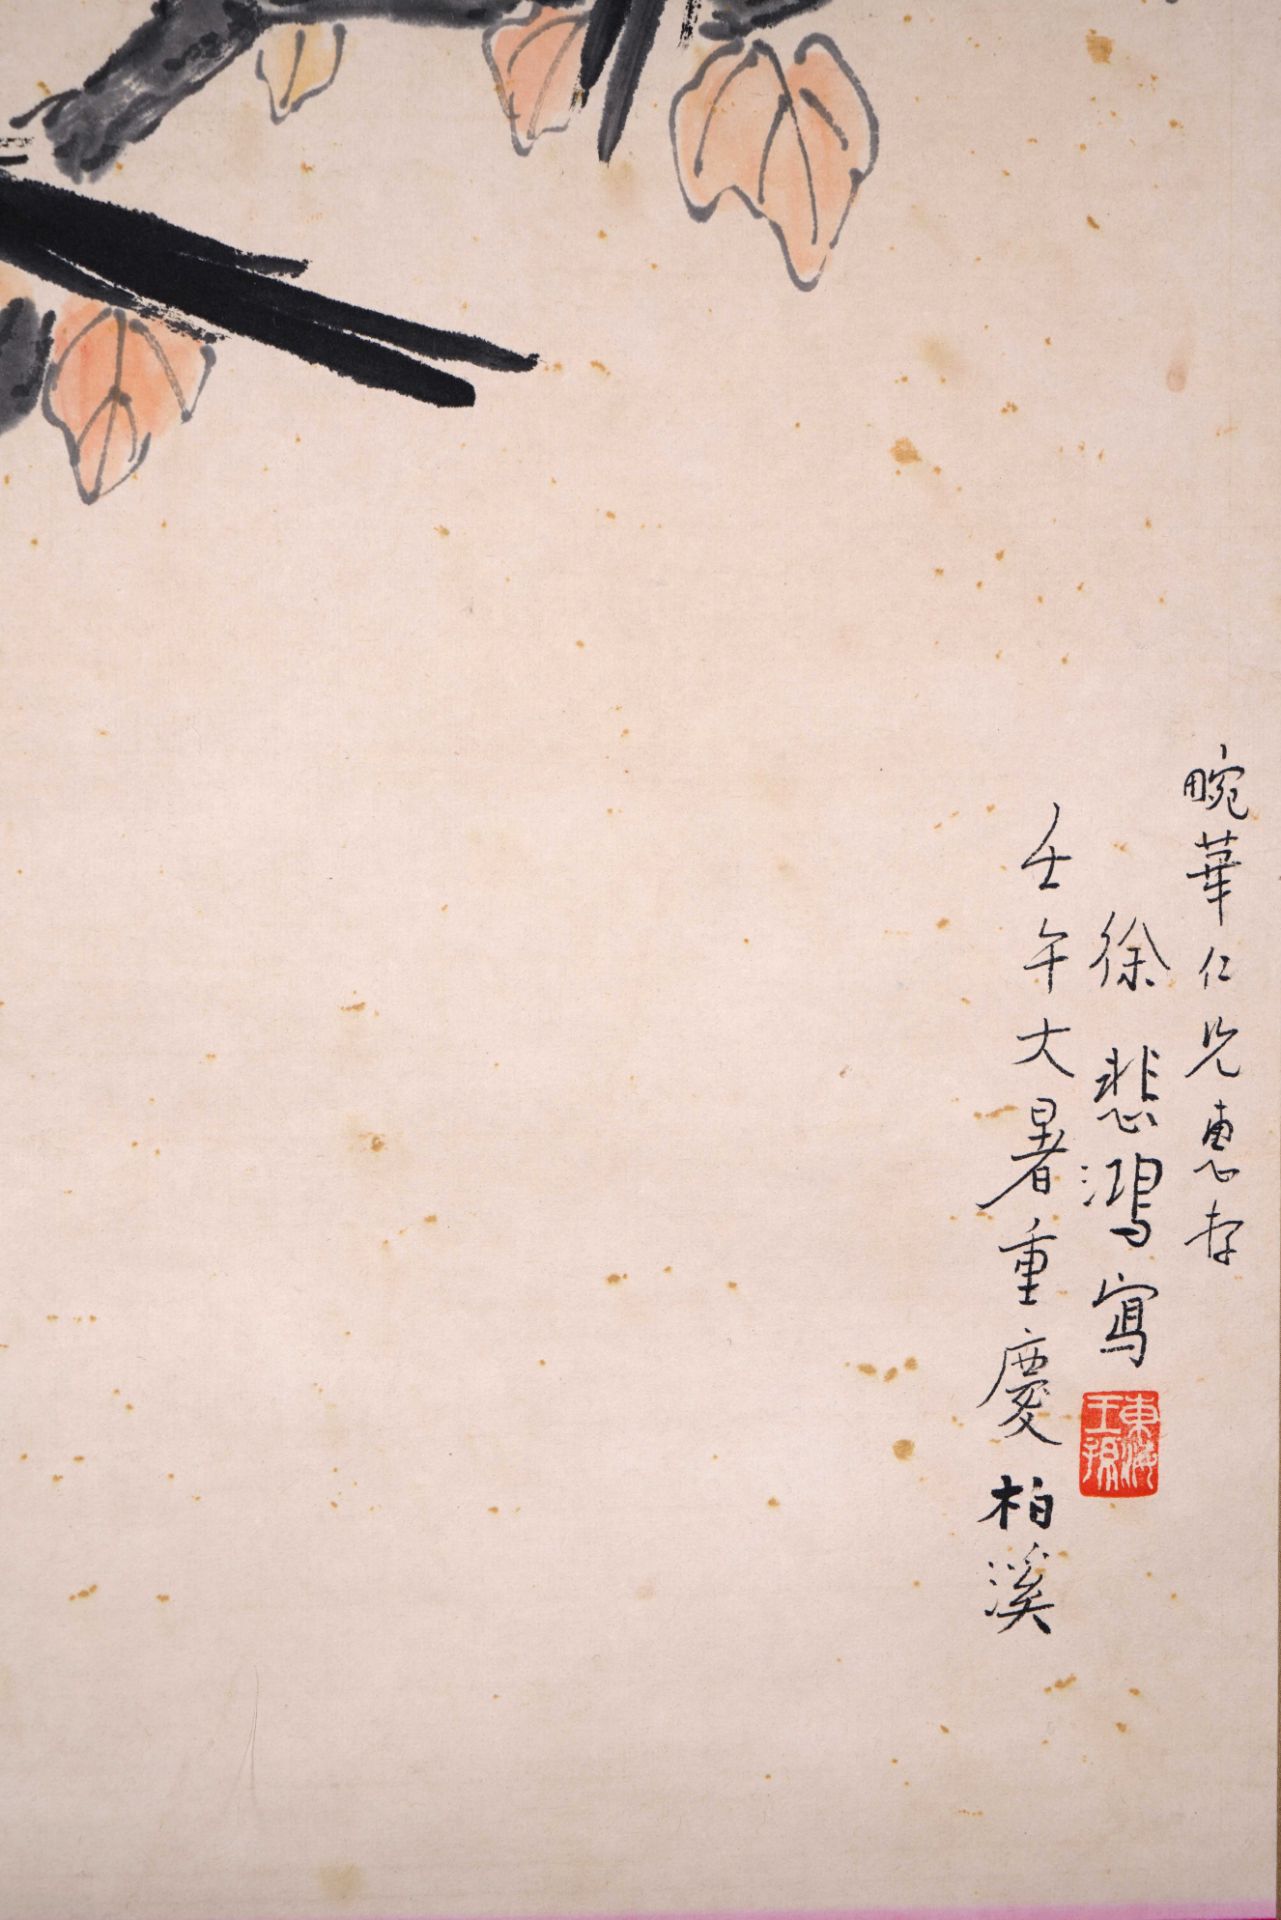 A Chinese Scroll Painting by Xu Beihong - Image 6 of 10